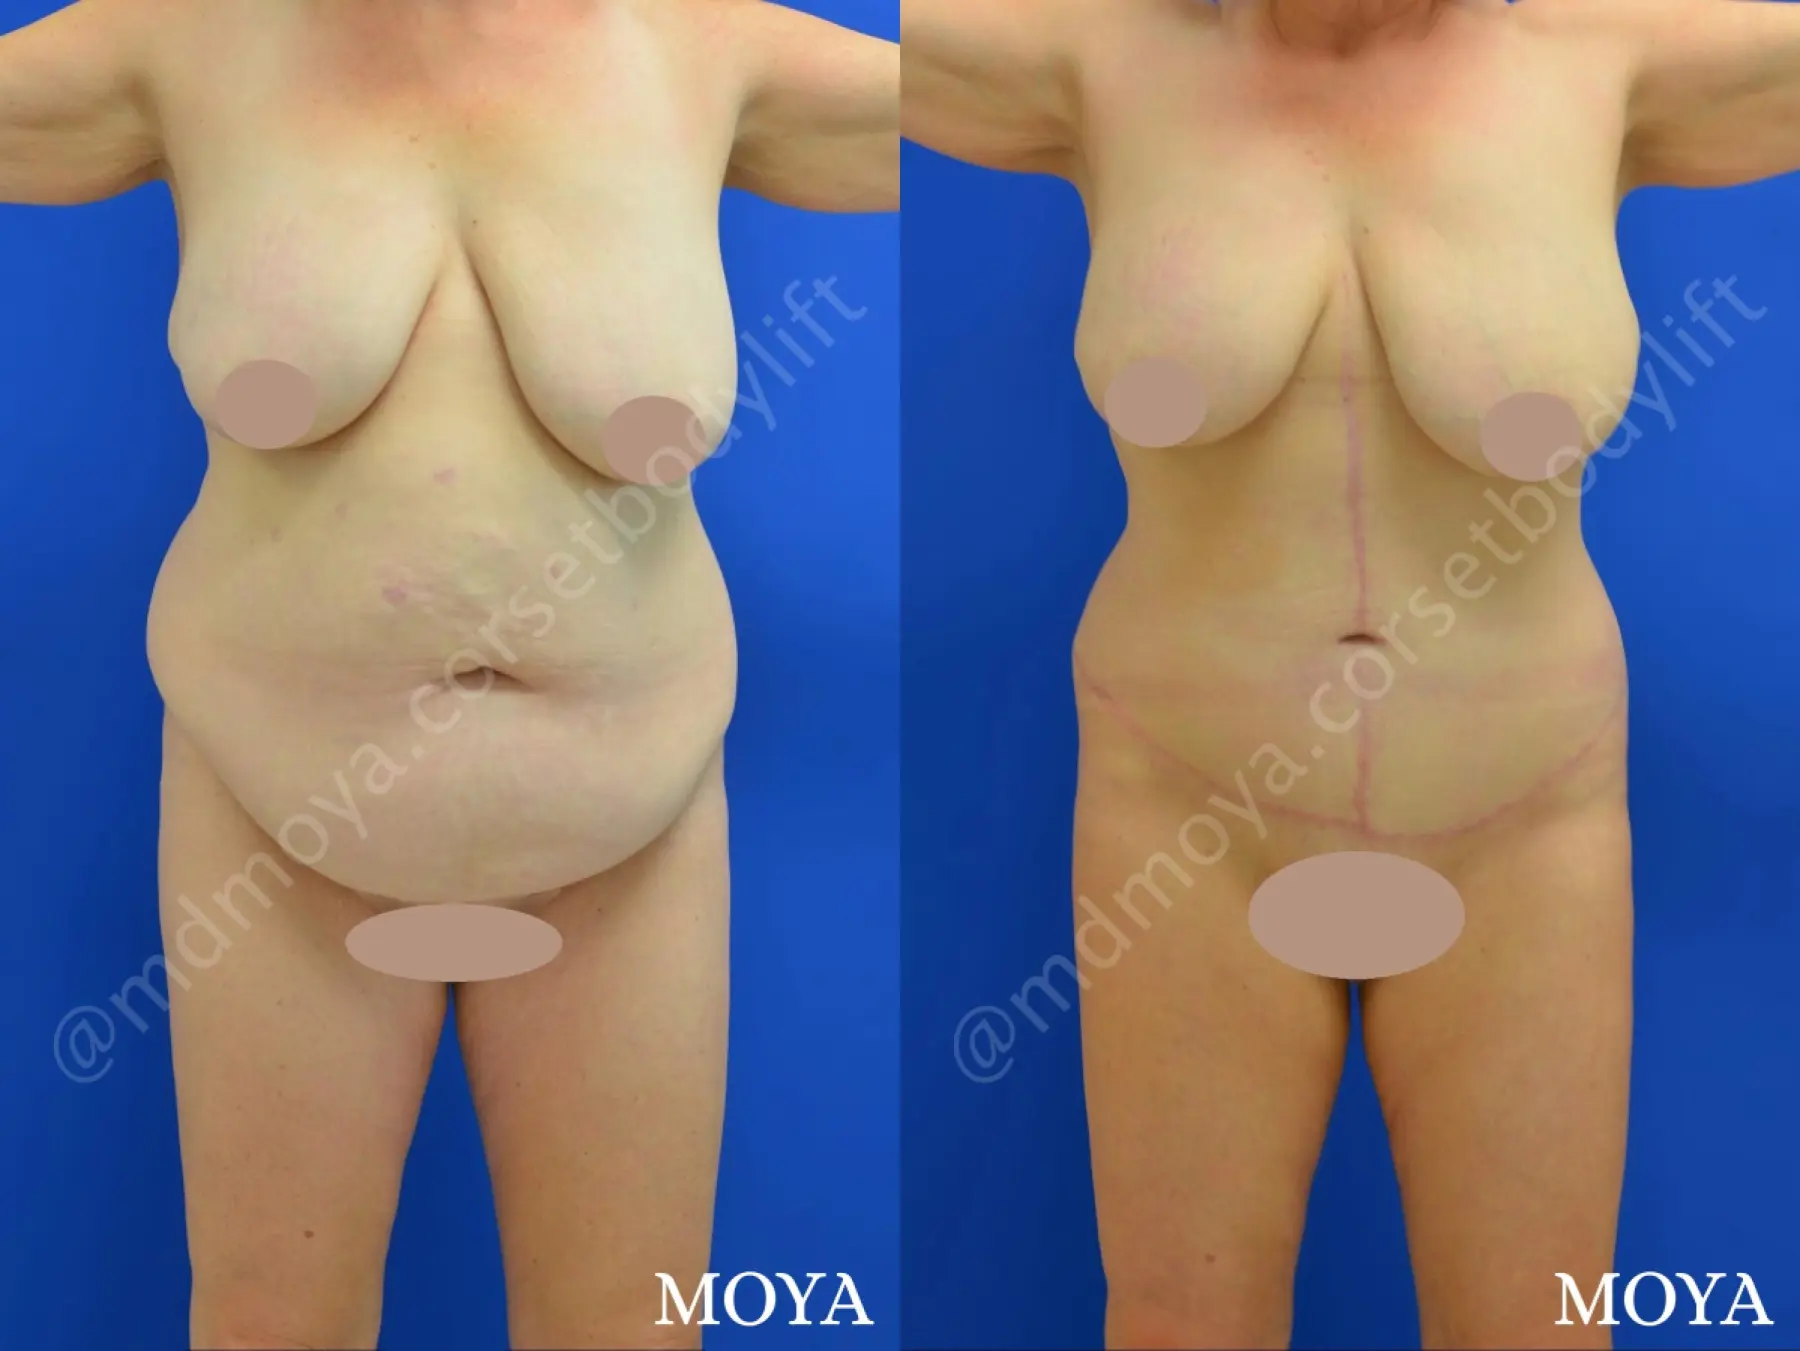 Fleur-de-lis Tummy Tuck (std):  BMI 28 - Before and After  